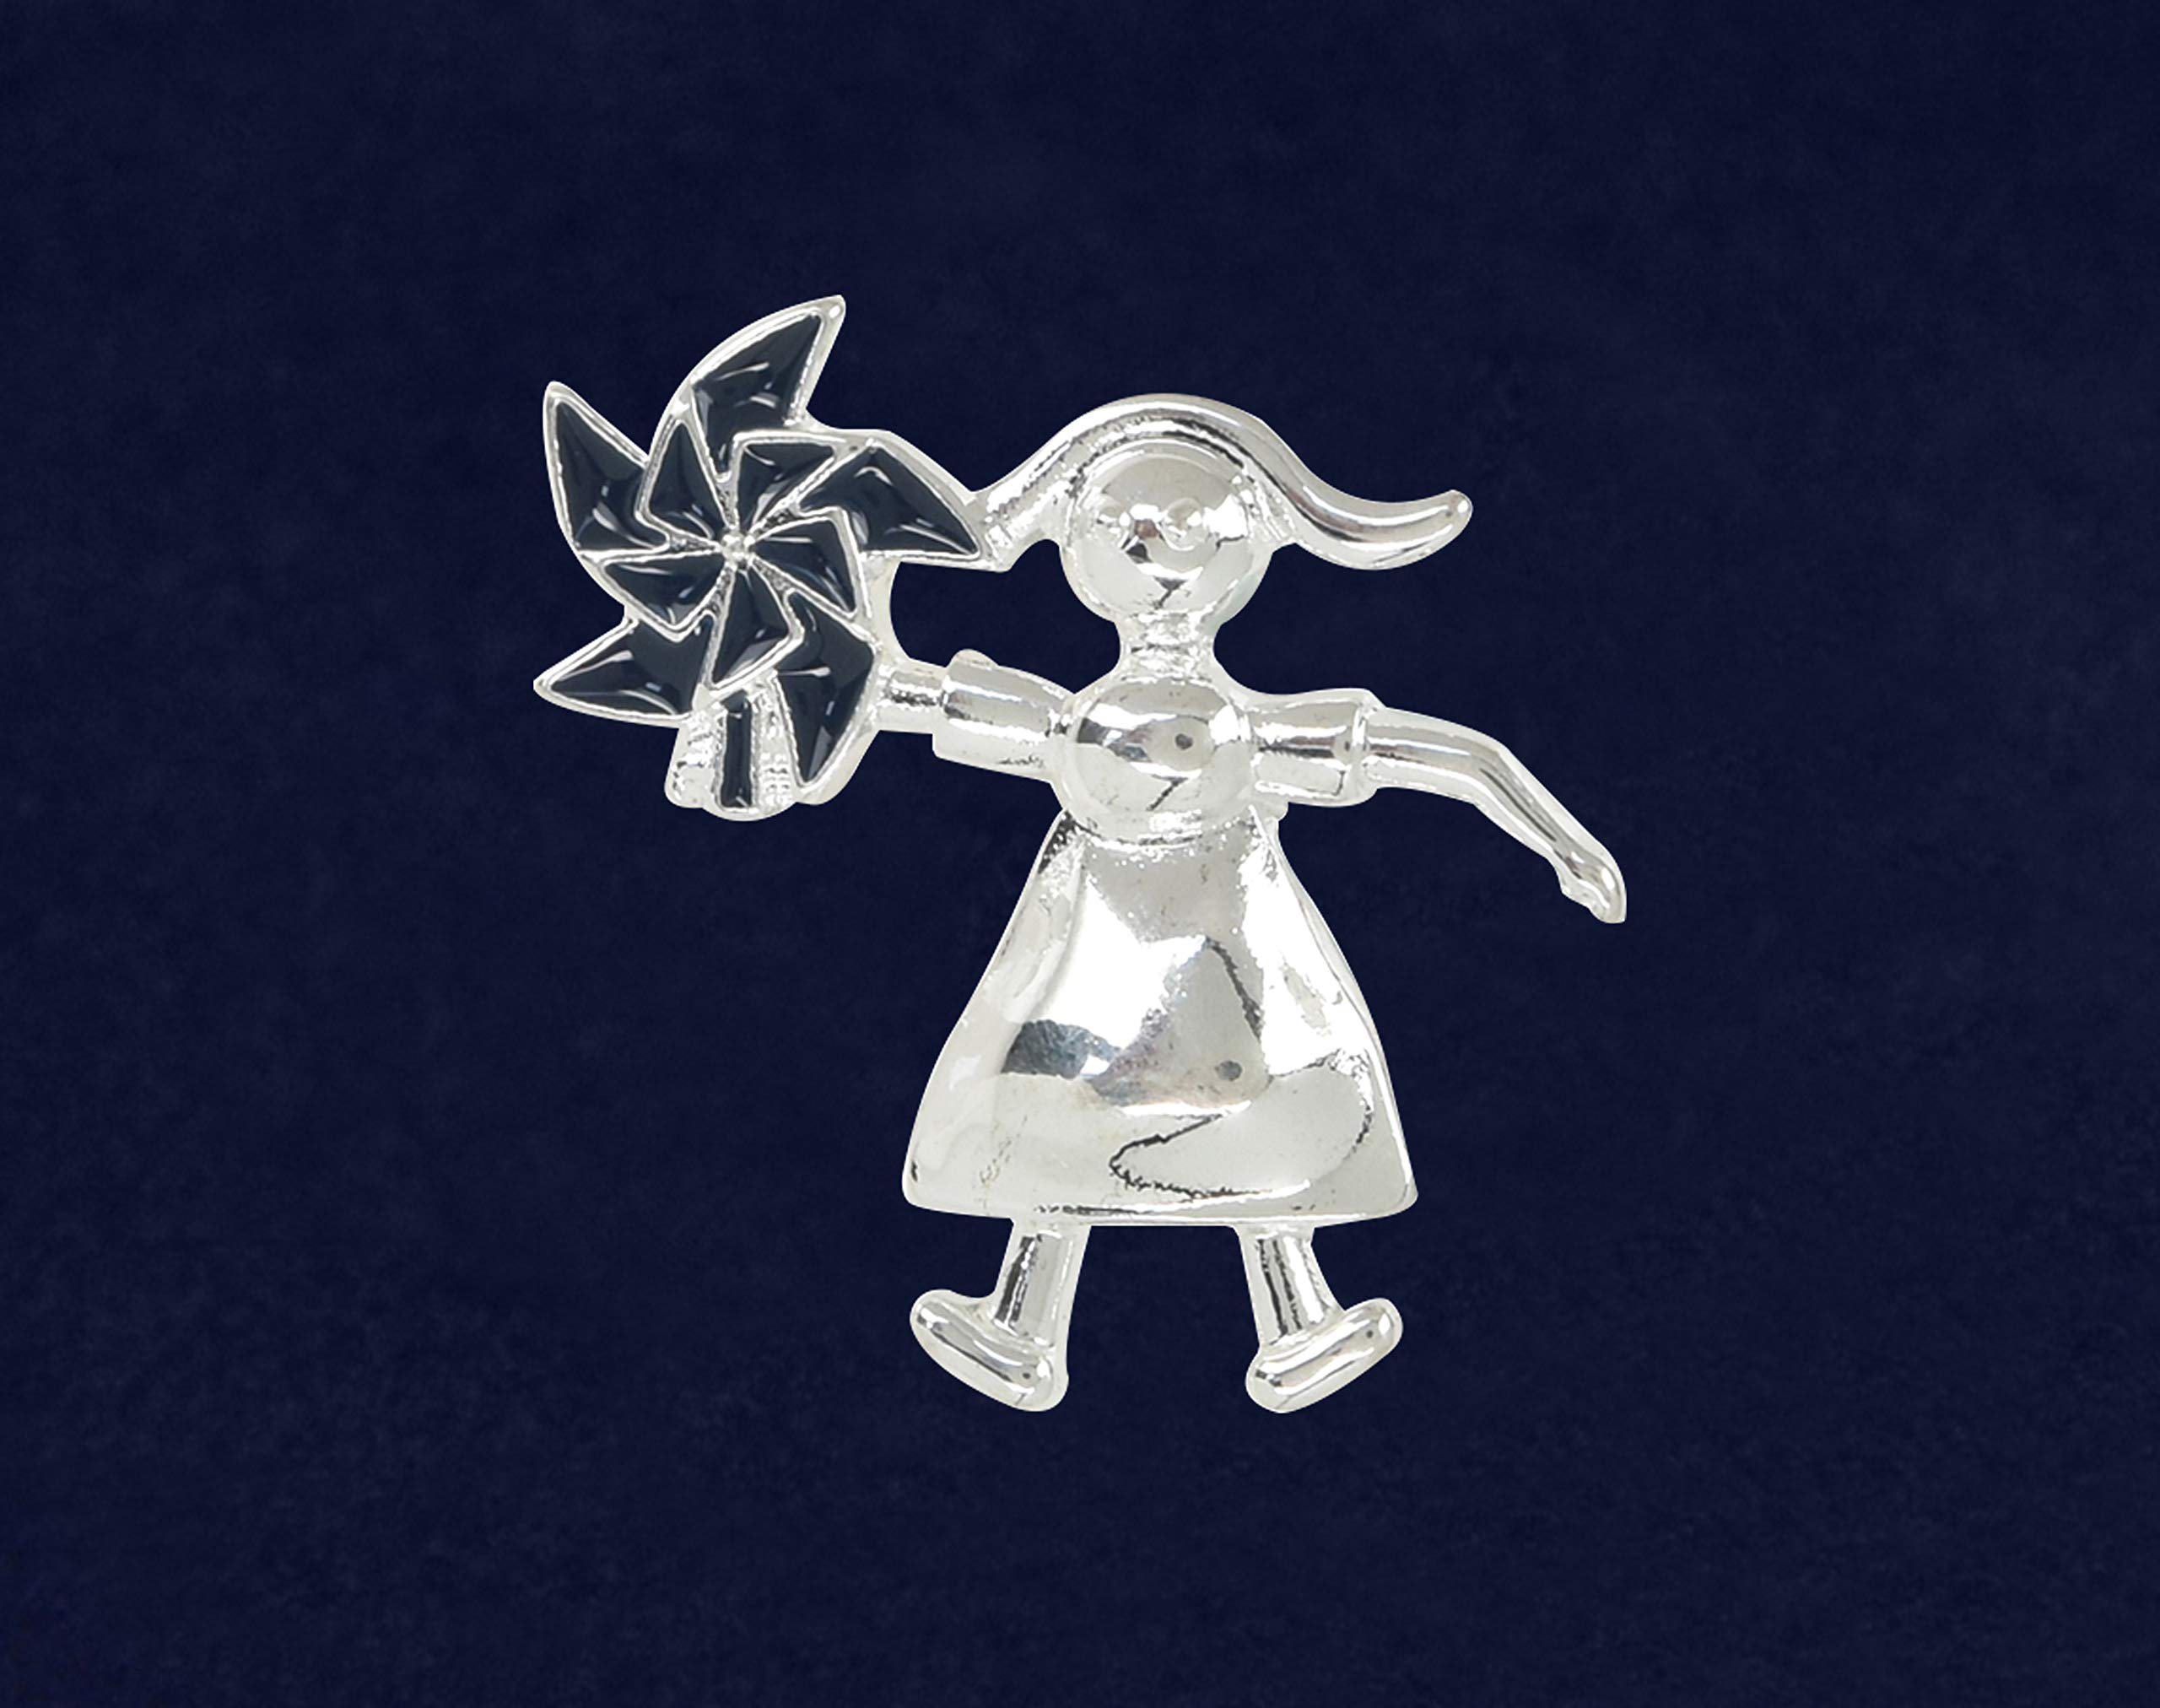 Fundraising For A Cause | Child Abuse Pinwheel Pin – Girl Holding Pinwheel for Child Abuse Awareness, Gift-Giving, Fundraising and More